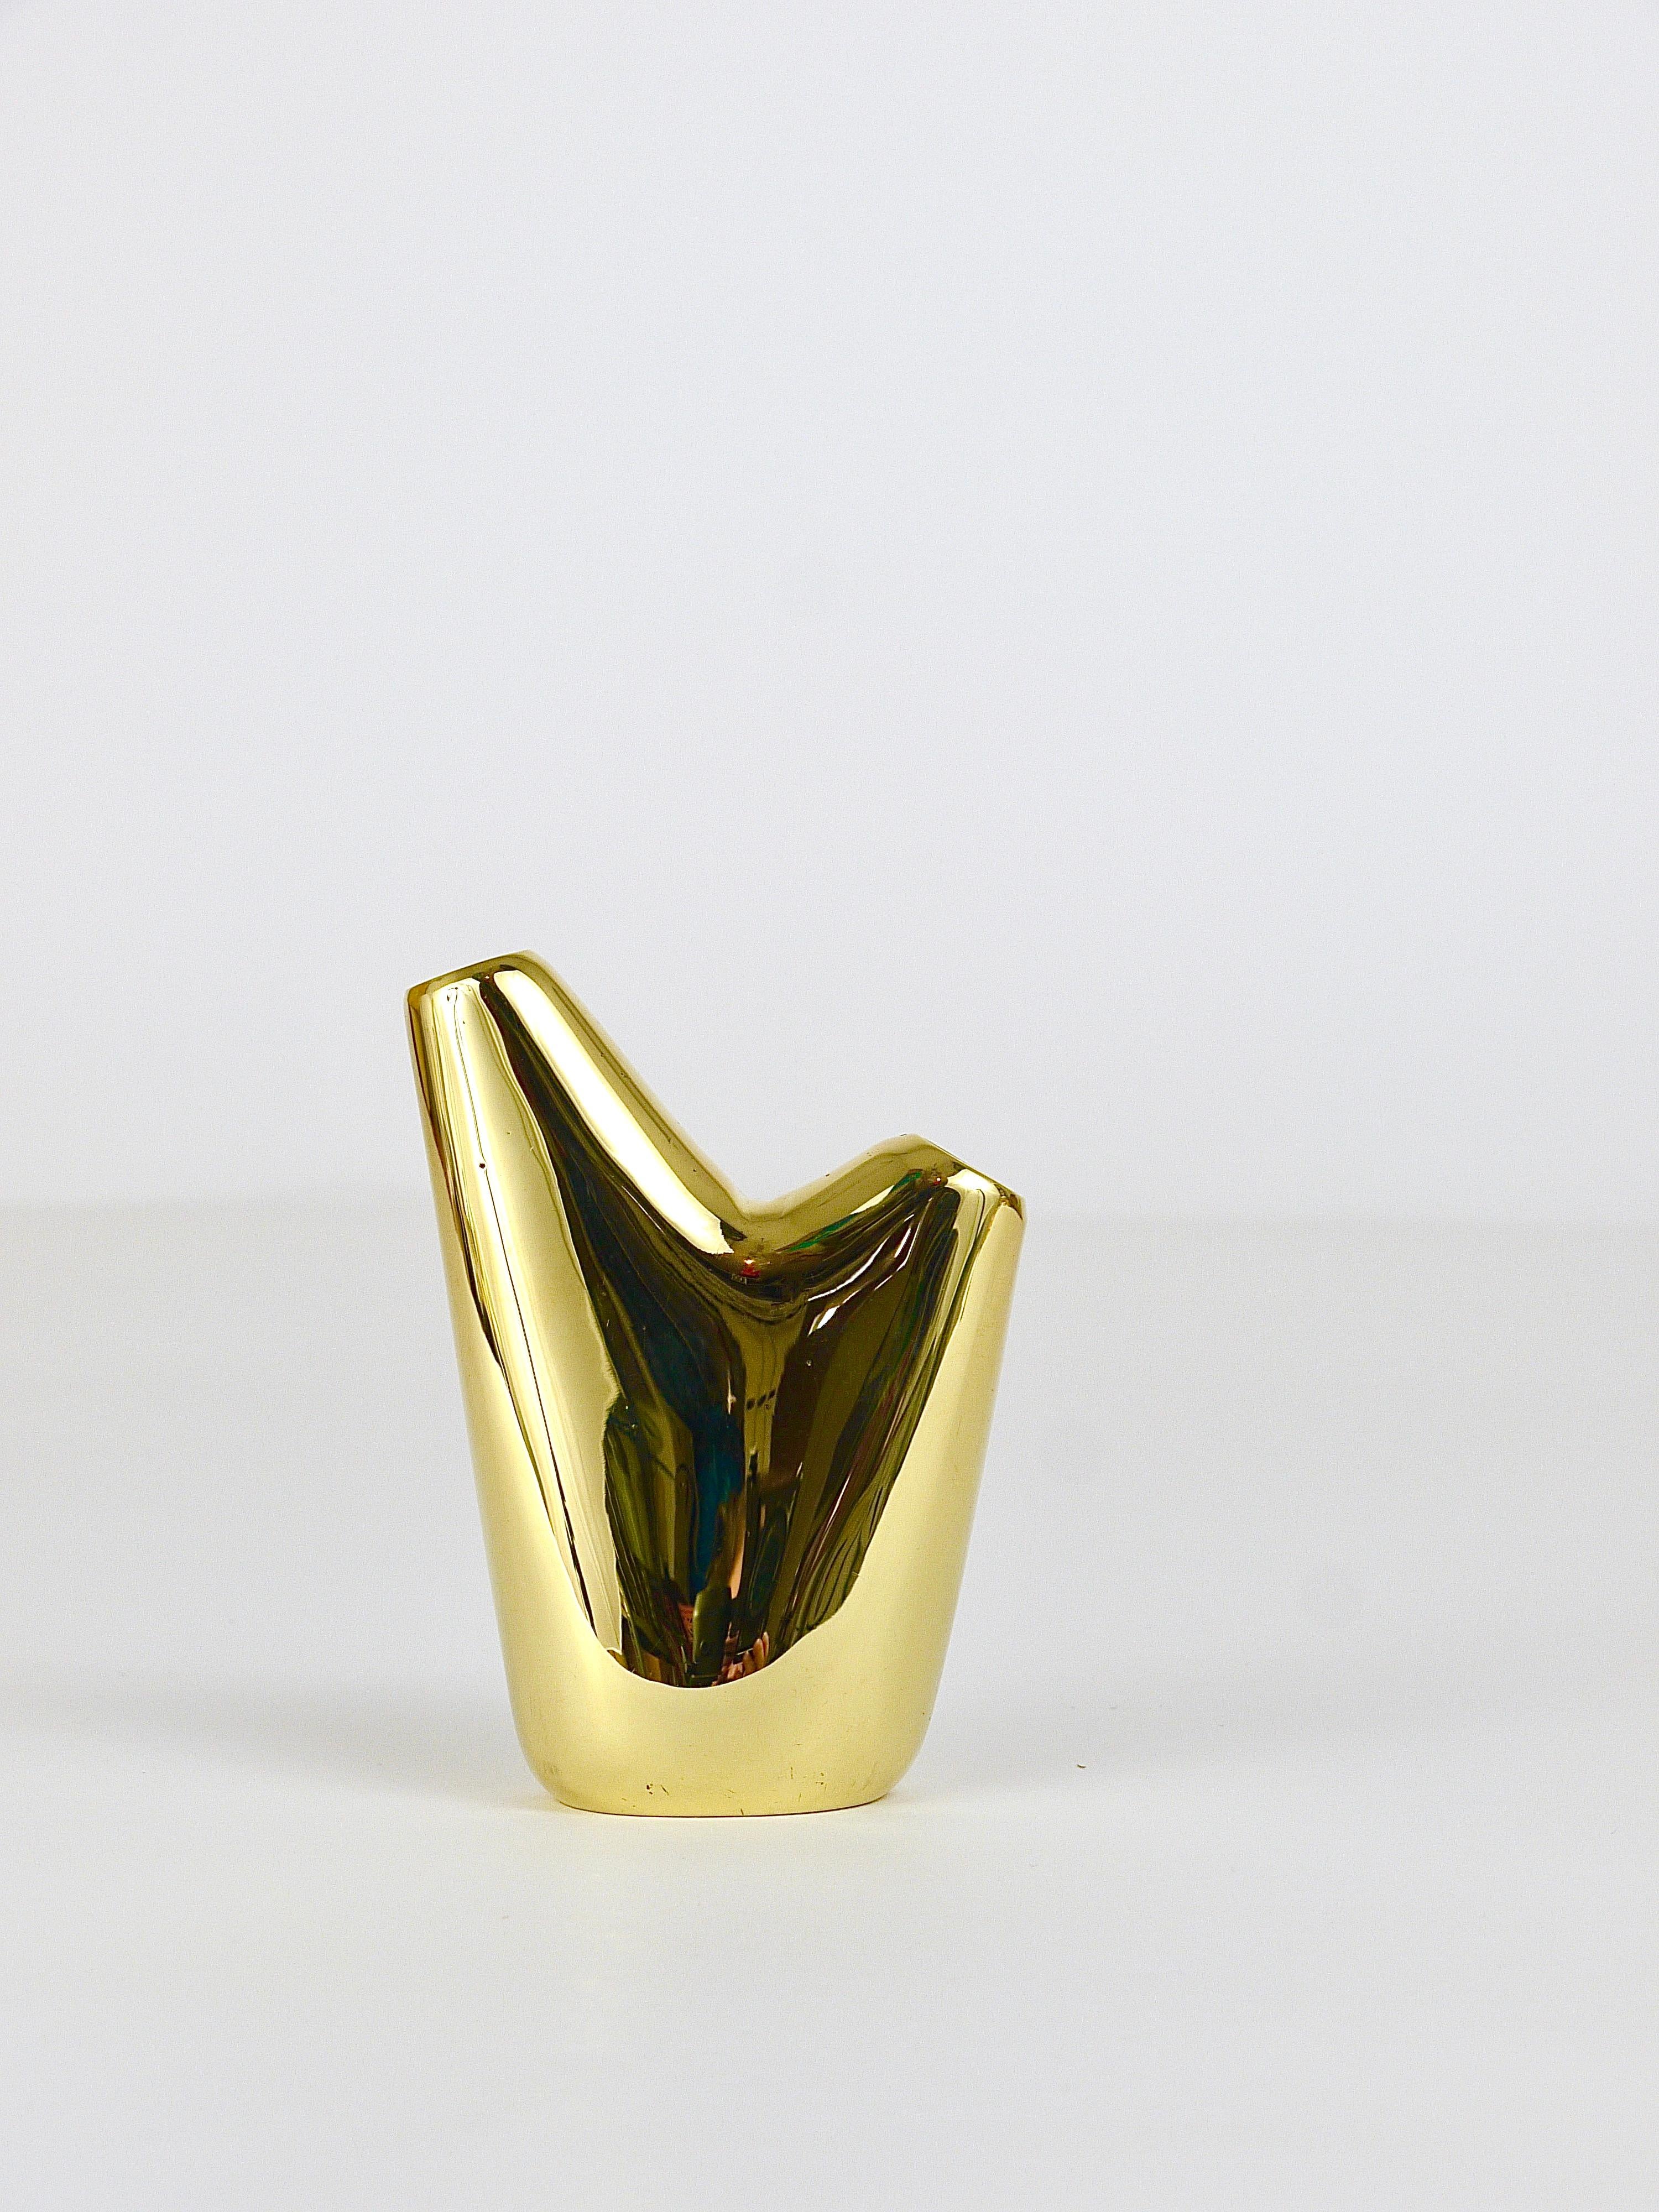 Carl Auböck Aorta Vase, Polished Brass, Austria In Excellent Condition For Sale In Vienna, AT